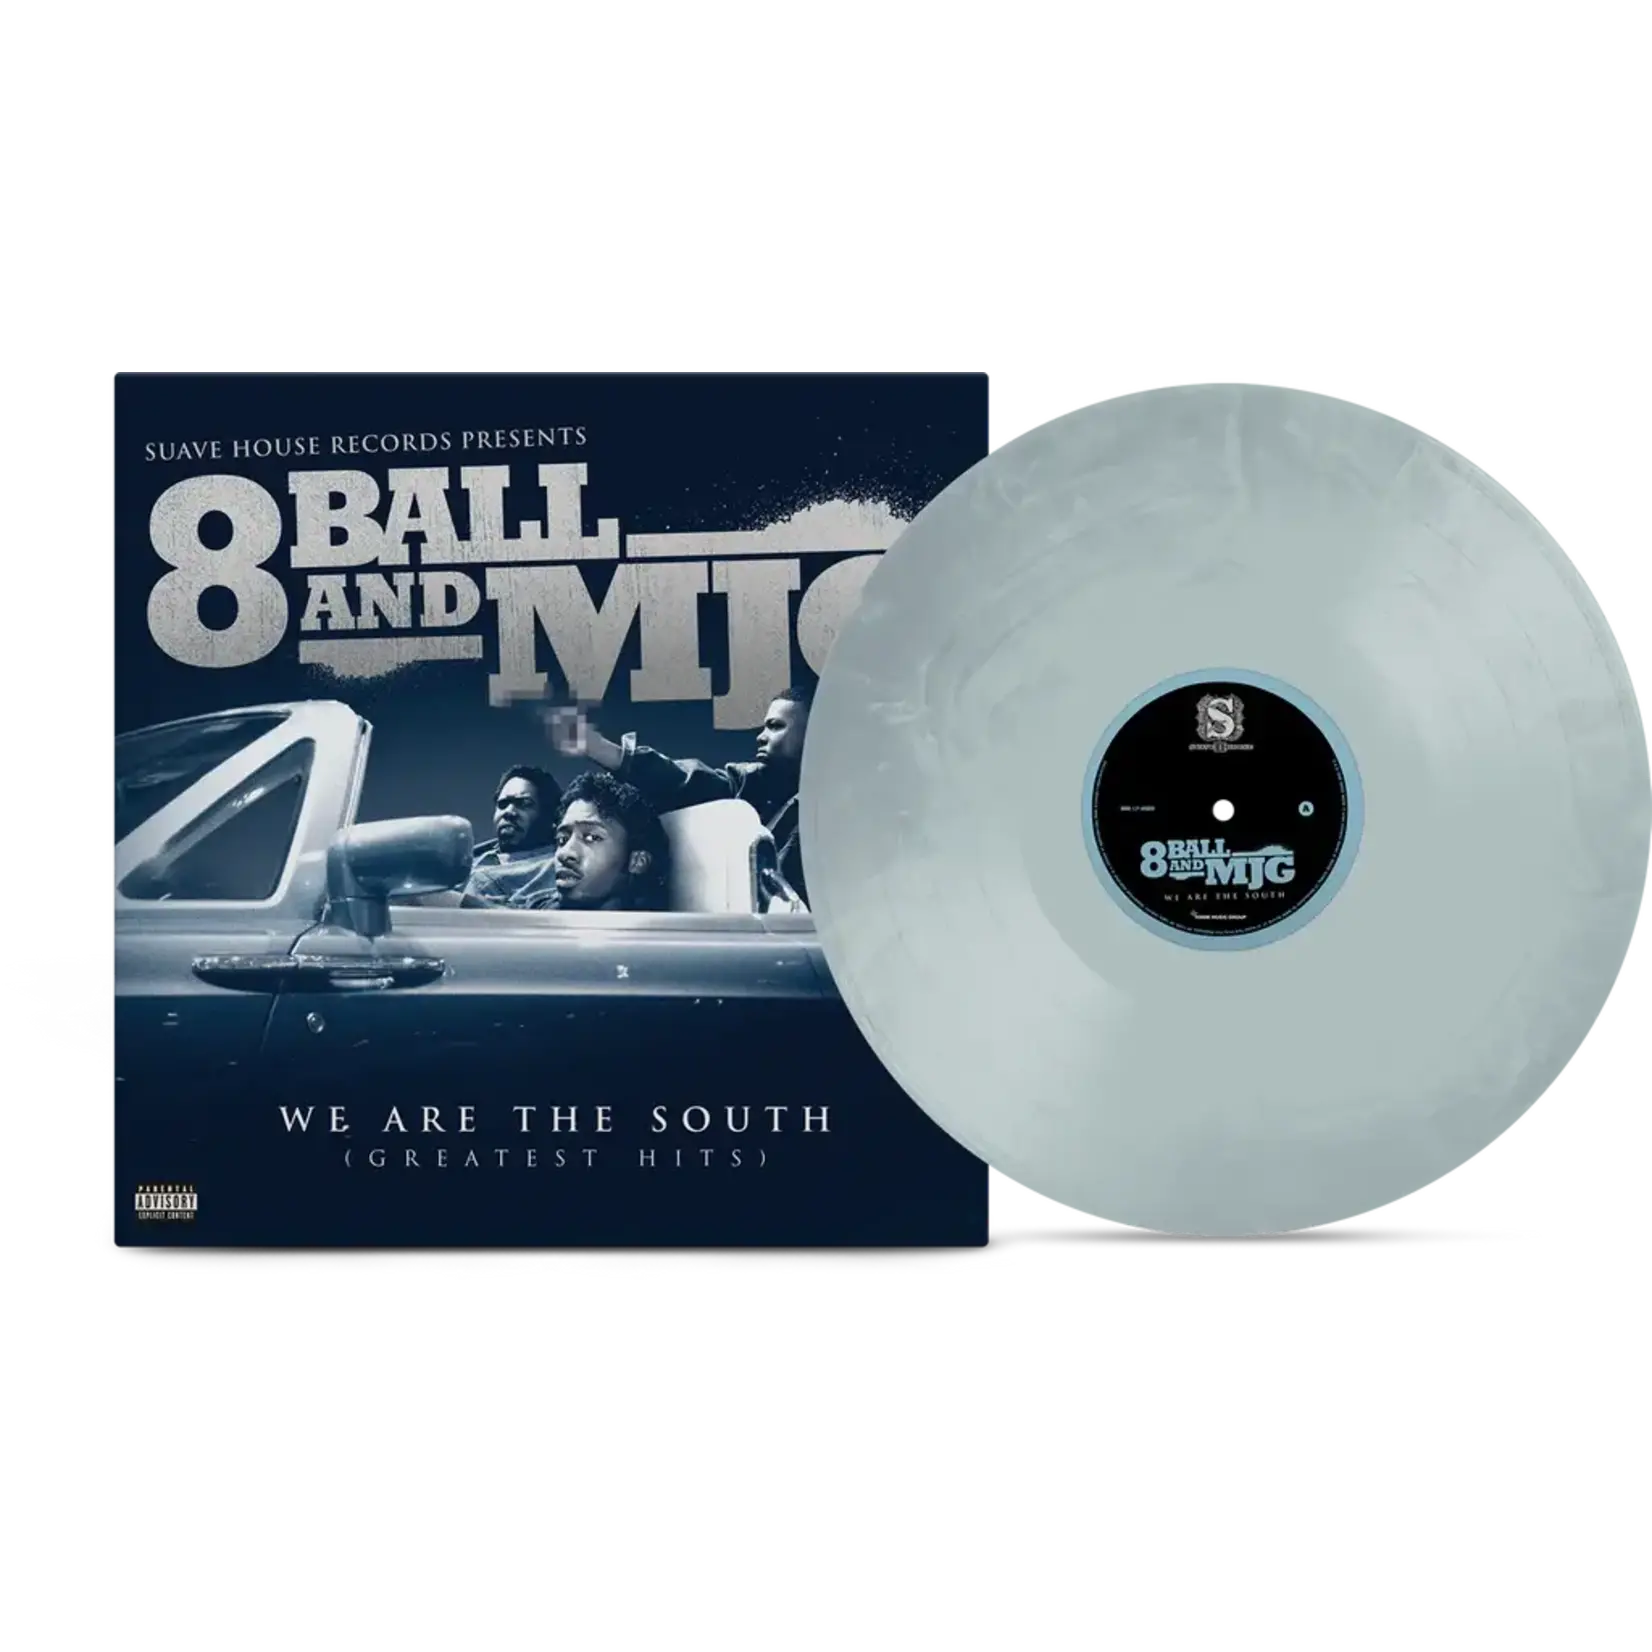 8Ball & MJG - We Are The South: Greatest Hits (Silver/Blue Vinyl) [2LP] (RSDBF2022)